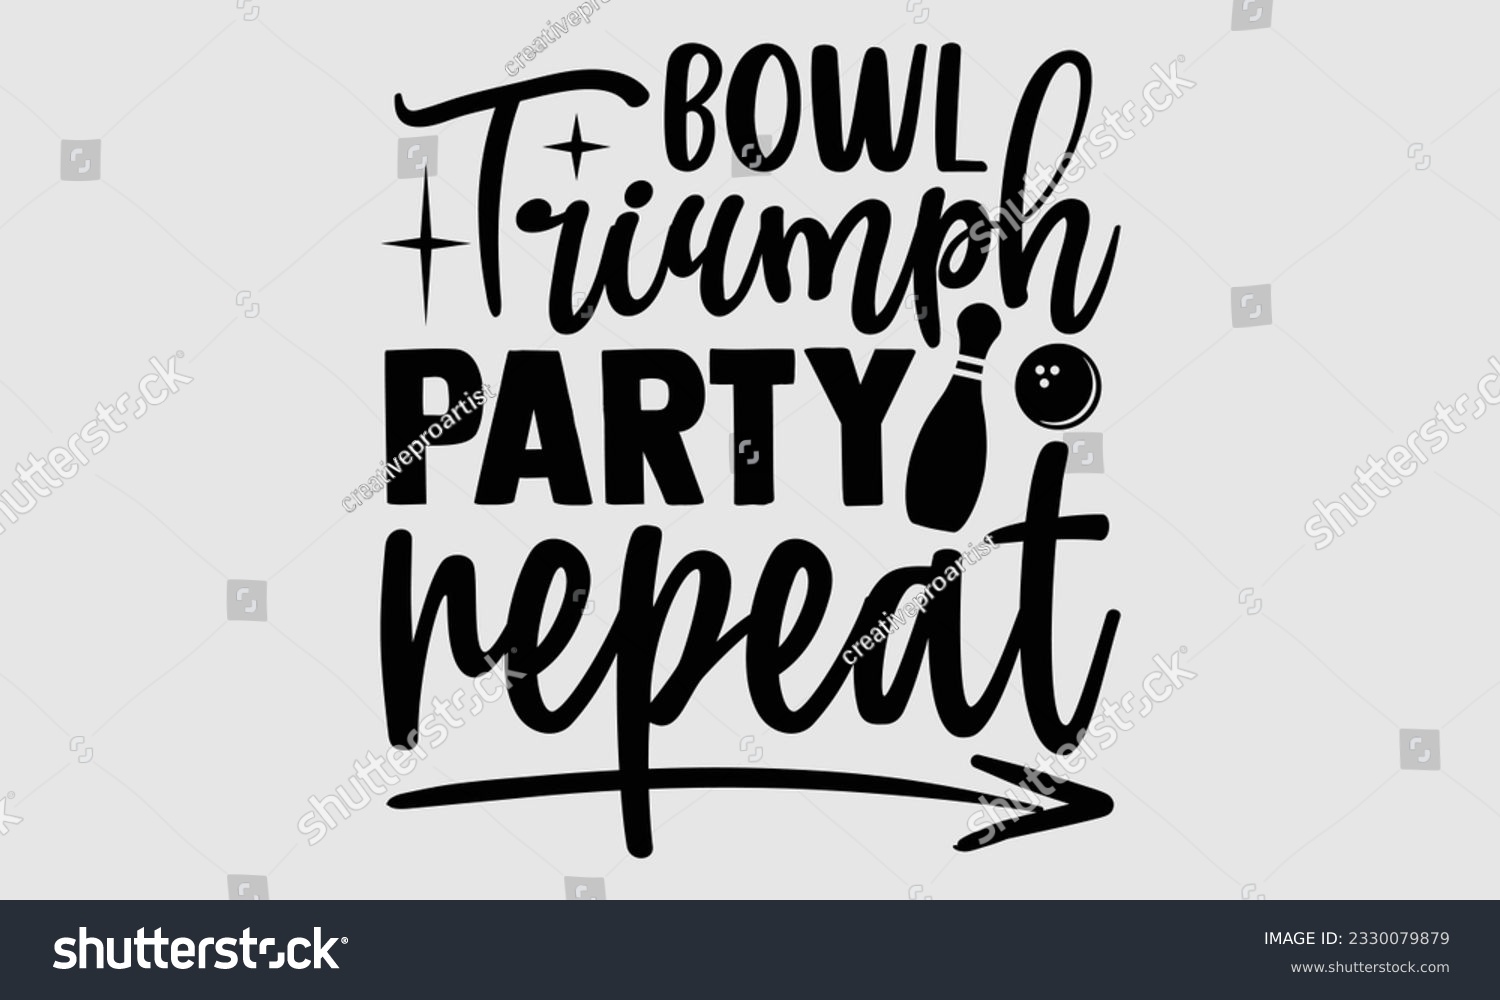 SVG of Bowl Triumph Party Repeat- Bowling t-shirt design, Handmade calligraphy vector Illustration for prints on SVG and bags, posters, greeting card template EPS svg